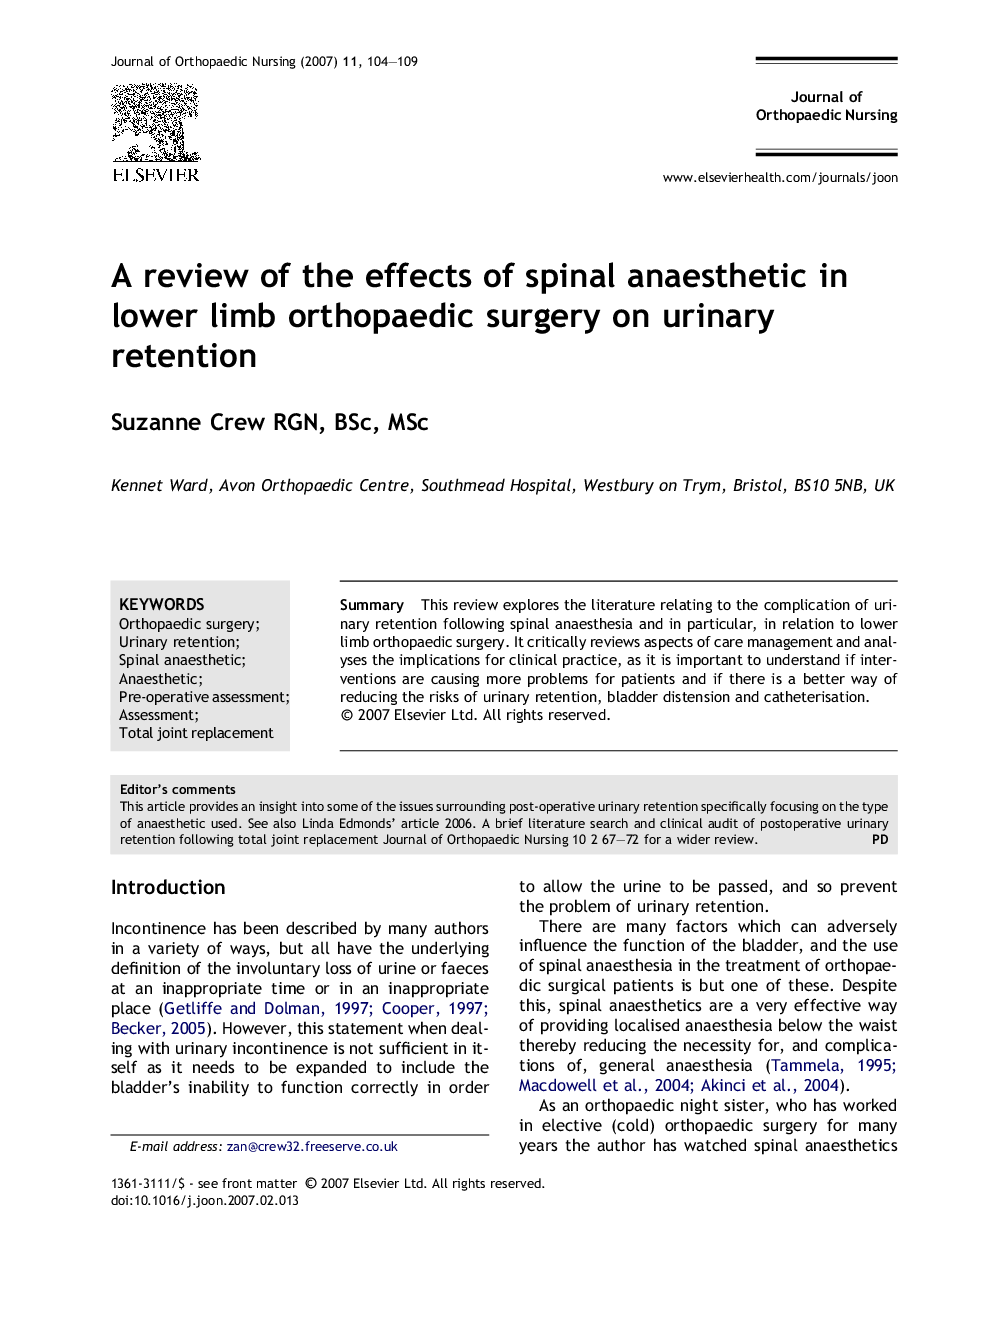 A review of the effects of spinal anaesthetic in lower limb orthopaedic surgery on urinary retention